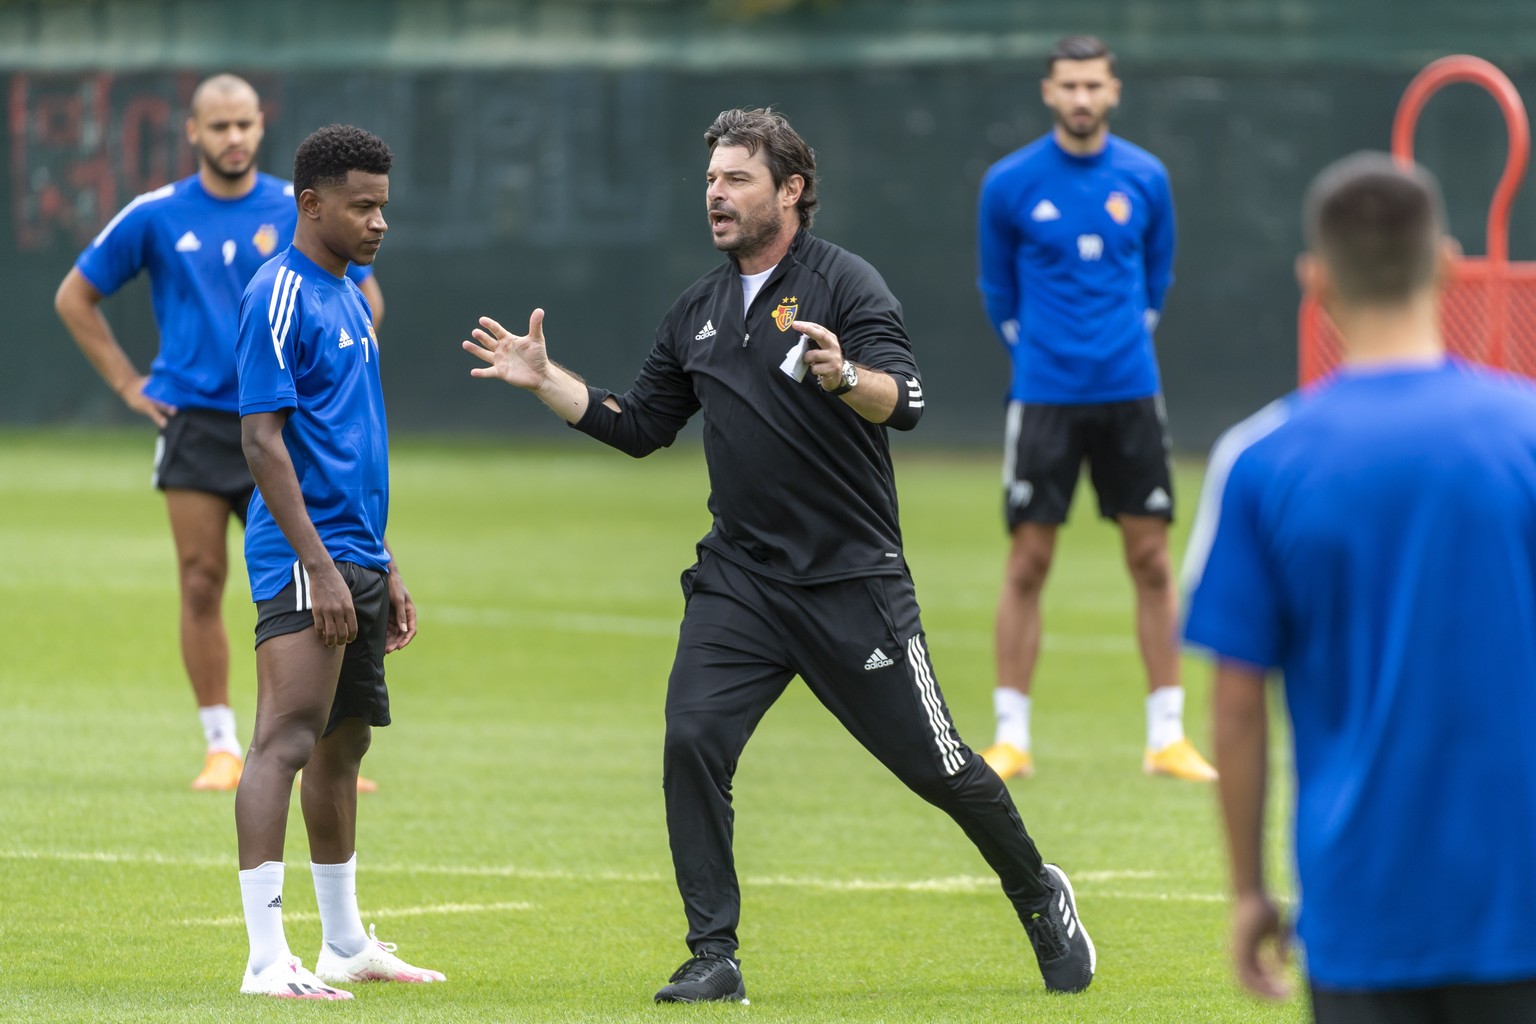 epa08639677 FC Basel���s new head coach Ciriaco Sforza during his first training session in the St. Jakob-Park training area in Basel, Switzerland, on 01 September 2020. EPA/GEORGIOS KEFALAS